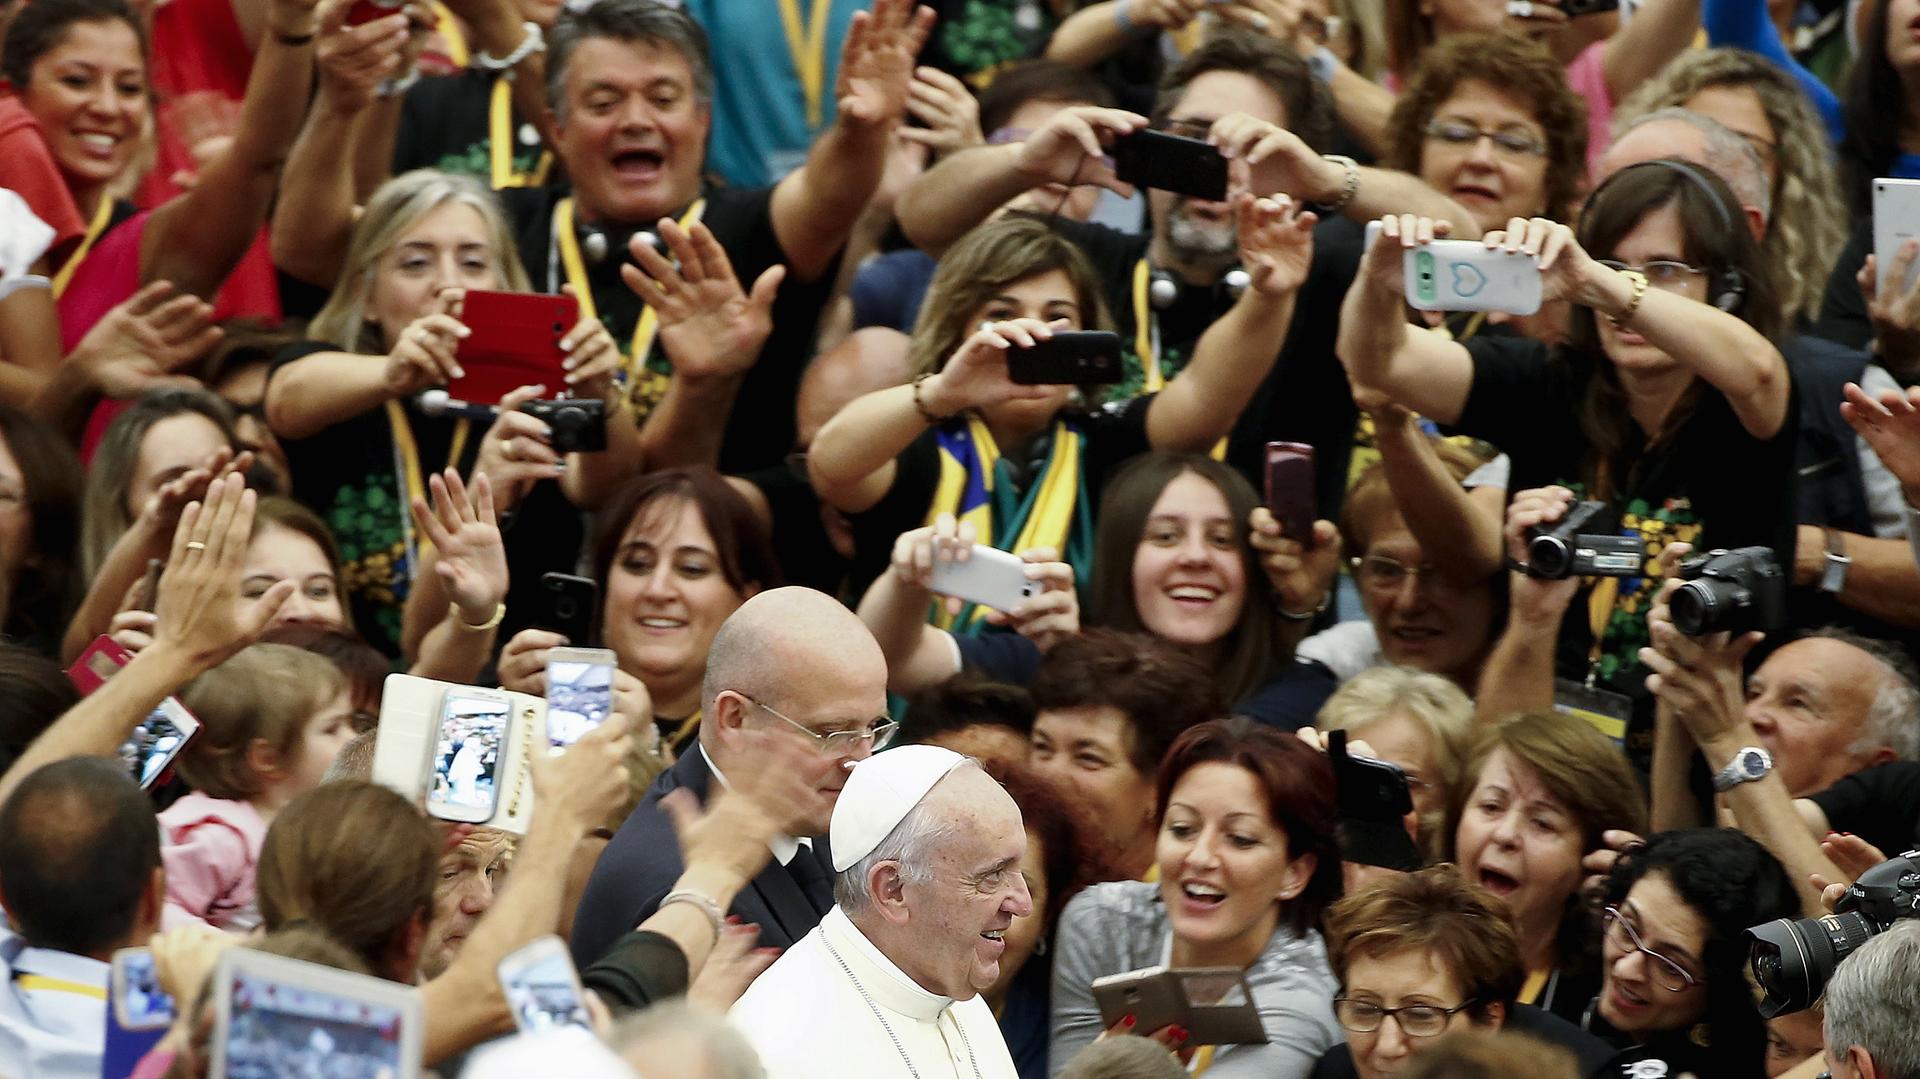 Francis greets the crowd outside of the Vatican in Rome on September 5, 2015.